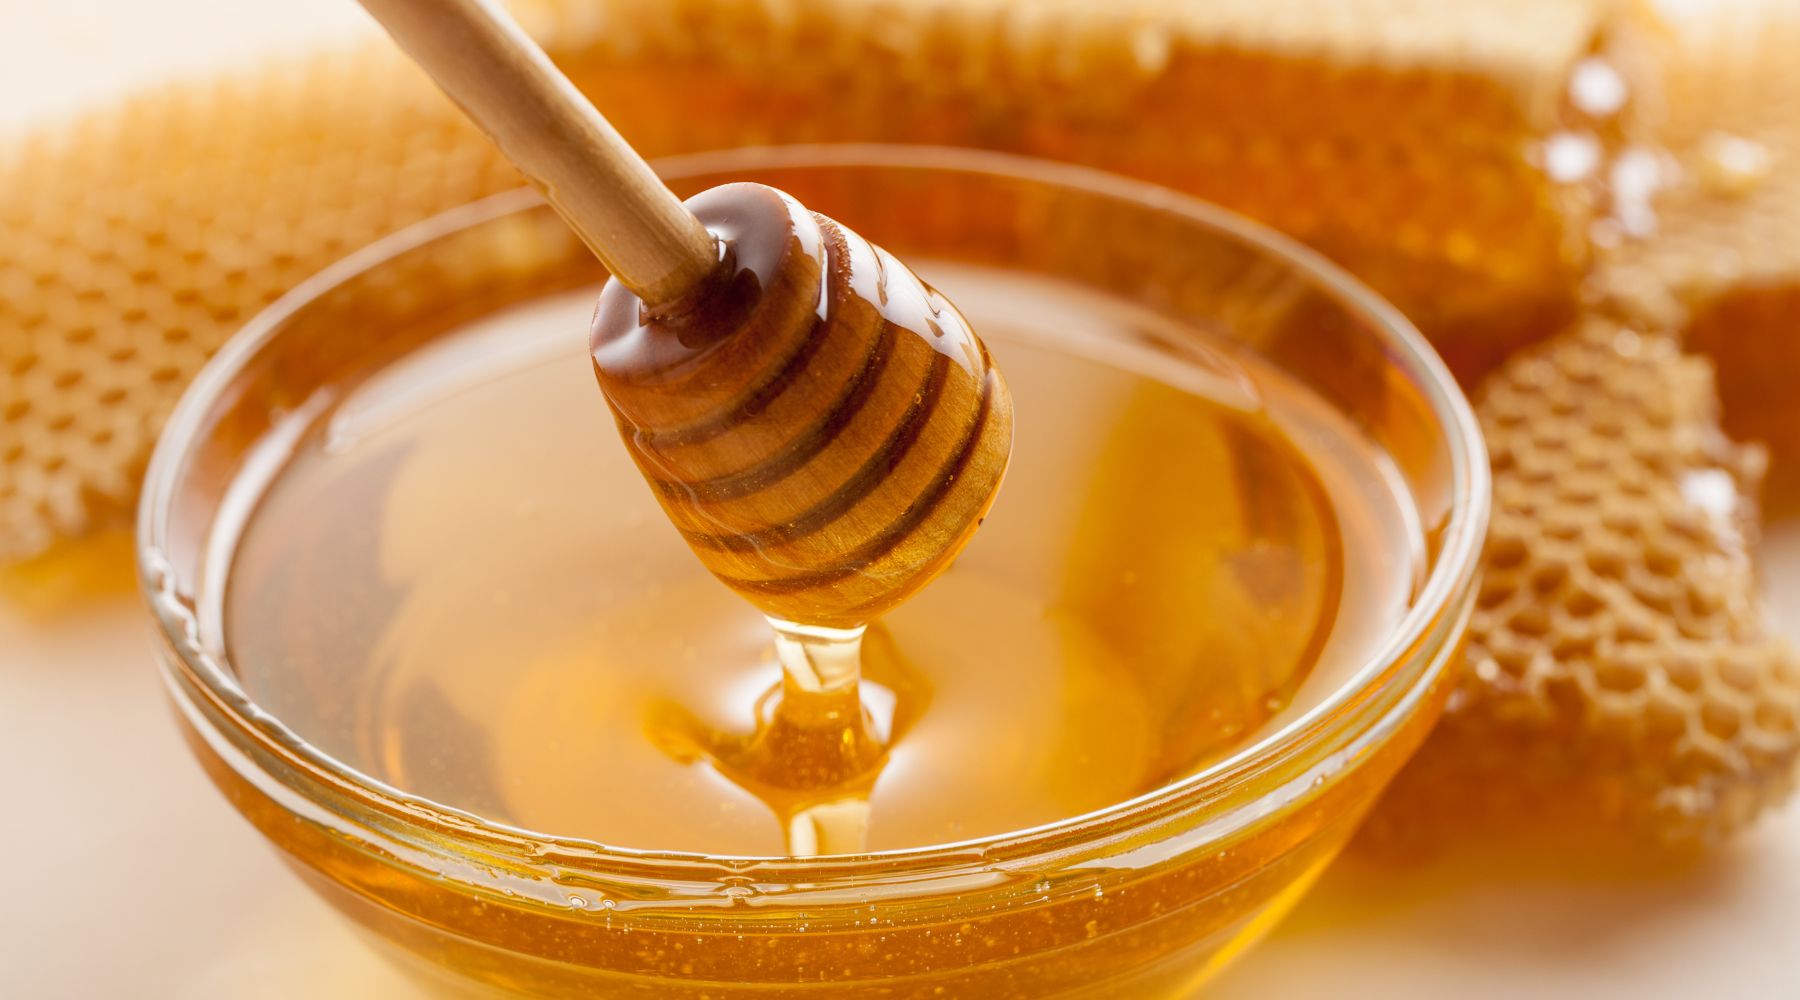 Collombatti Naturals Interesting Facts About Bees You Need To Know Blog - a glass bowl of honey with a wooden honey dipper surrounded by honeycomb